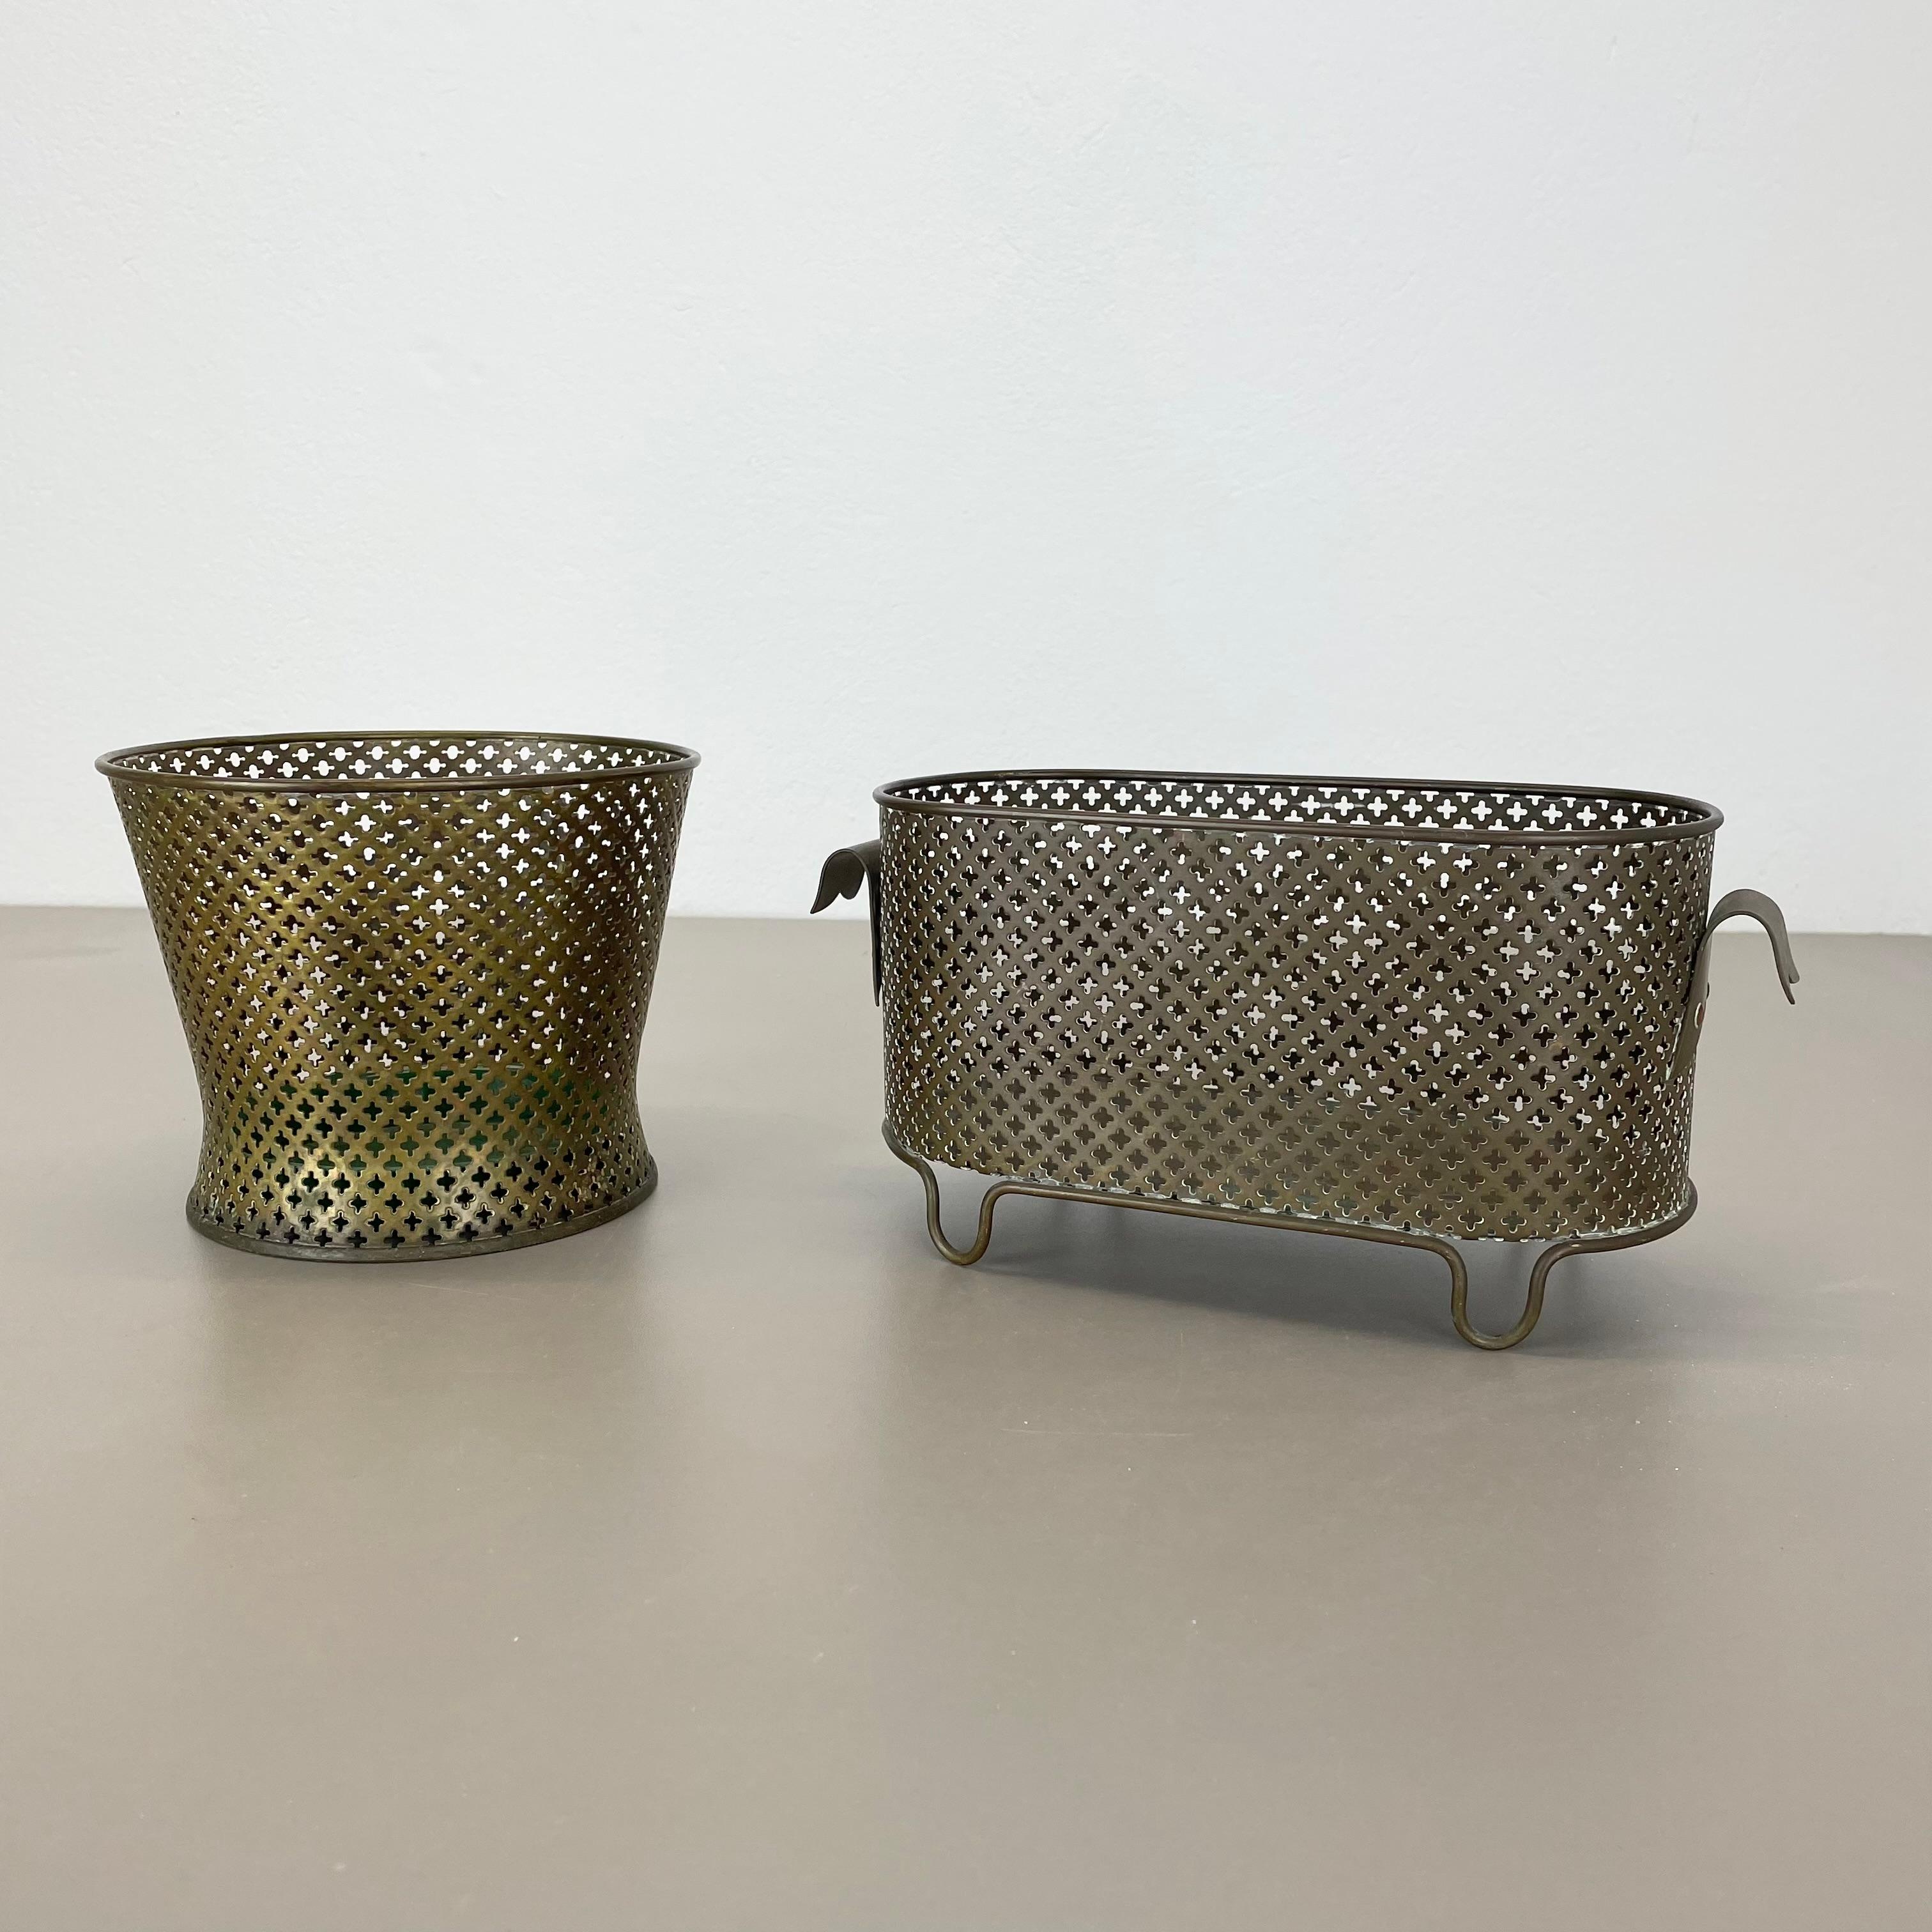 Article:

Set of two modernist metal plant pots.


Design:

attributed to Mathieu Mategot


Origin: 

France


Description:

This original set of twomodernist plant pots vases was produced in the 1950s in France. its is attributed to be designed and